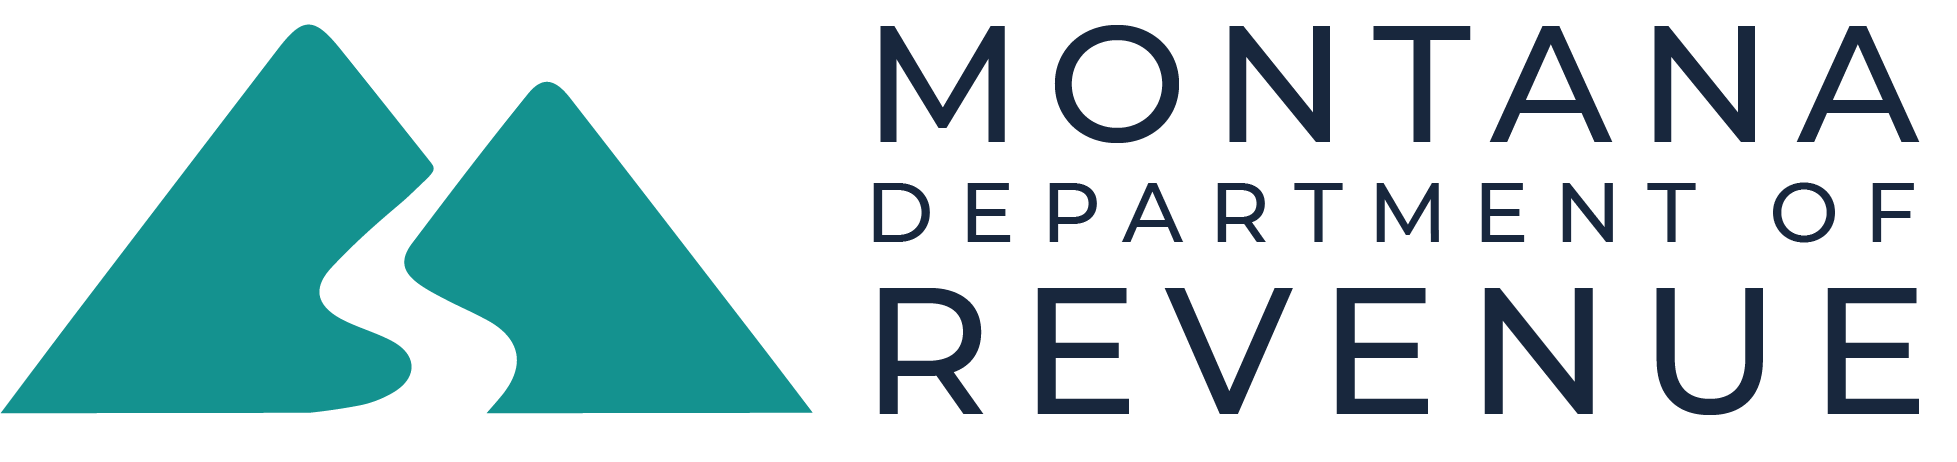 Abstract logo of two mountains divided by whitespace representing a river to the left of the words Montana Department of Revenue 